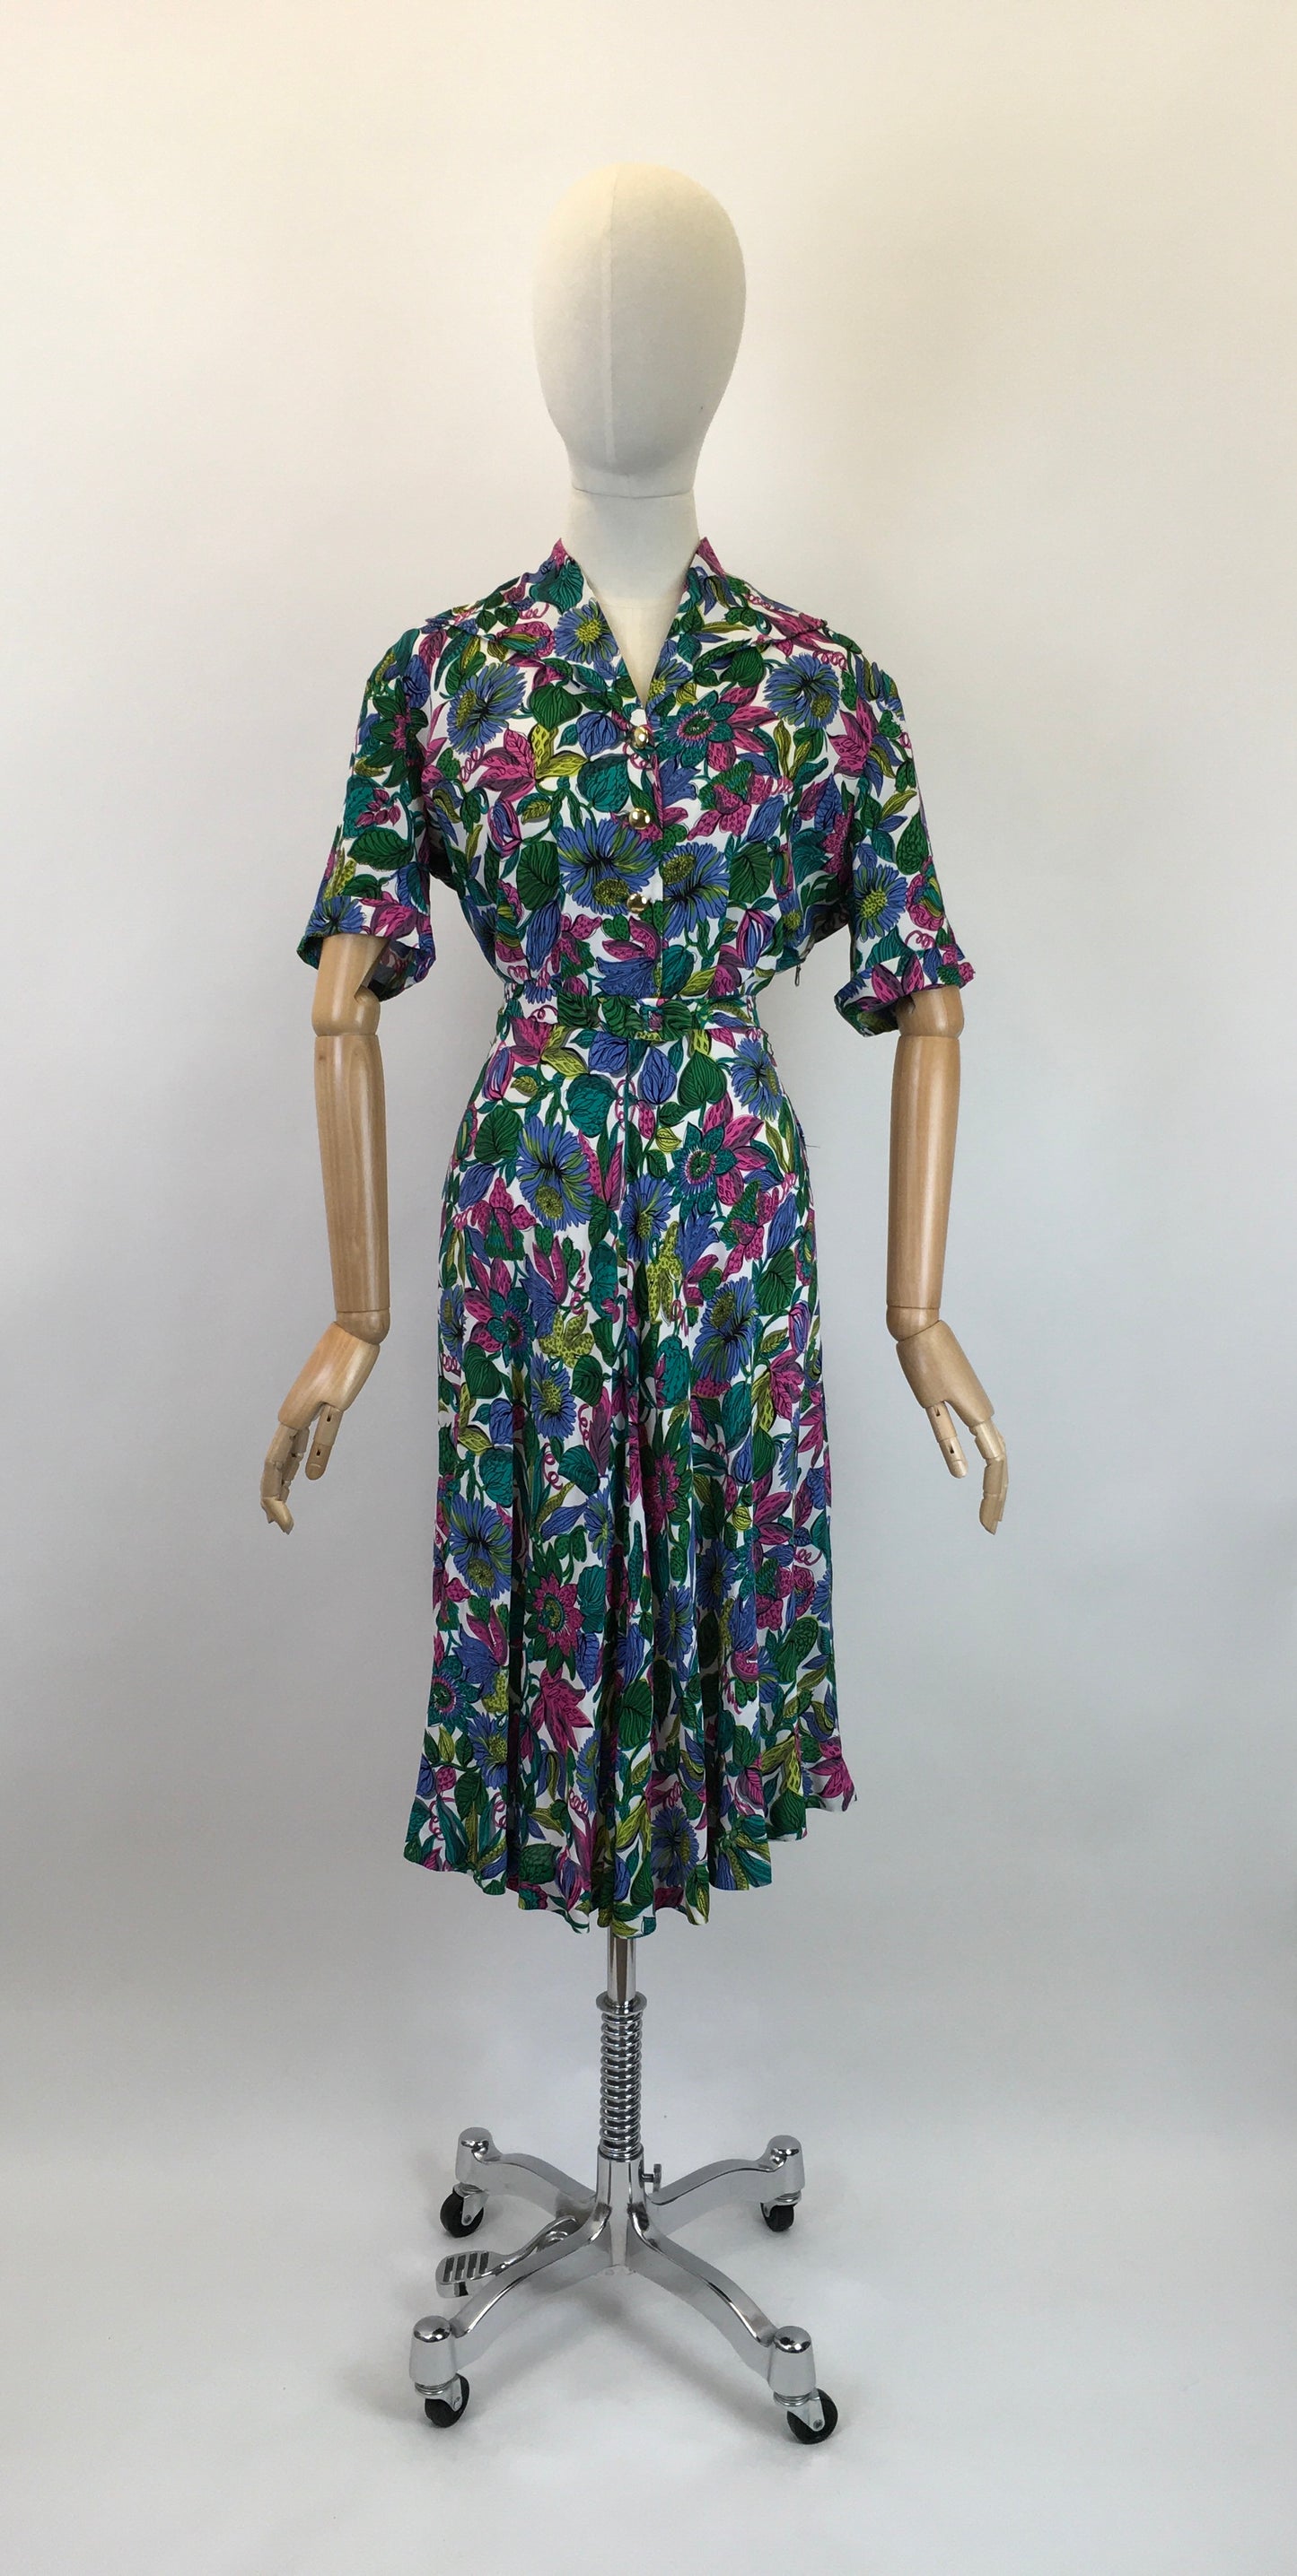 Original 1940's Sensational Floral Rayon Dress - In Fabulous Pops of Greens, Blue, Fuchsia, Chartreuse and Purple